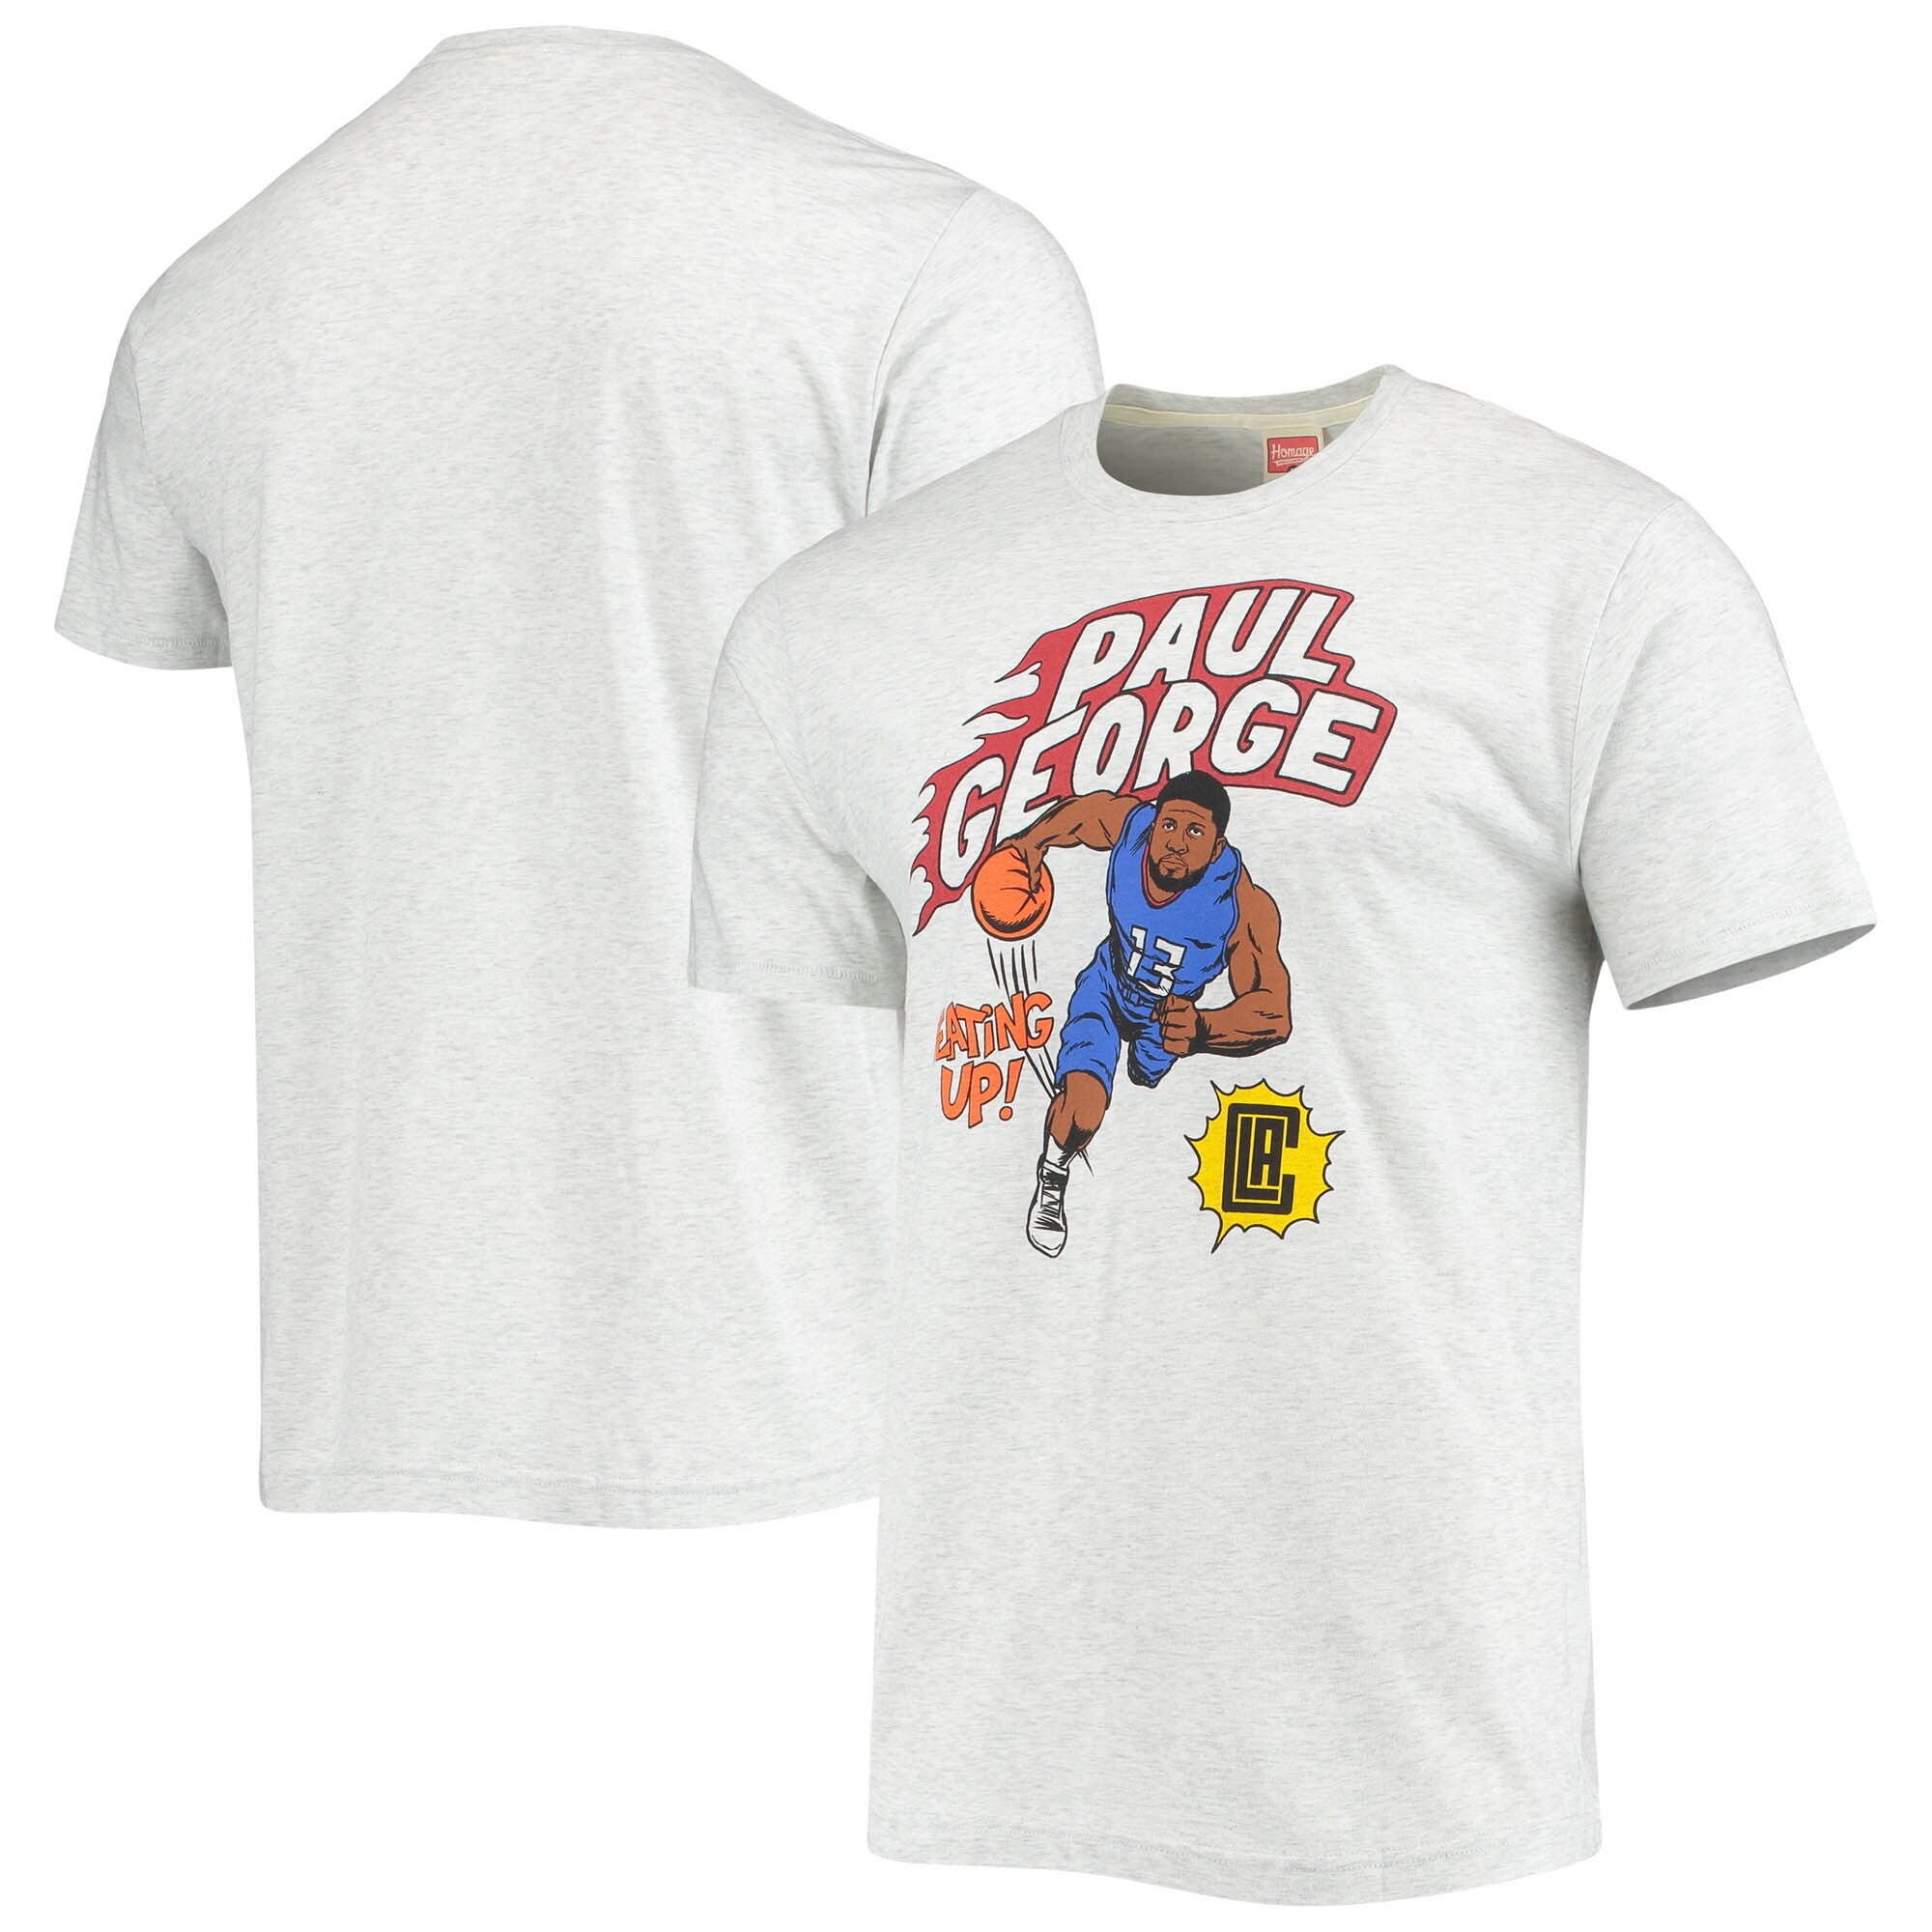 Homage Clippers Comic Book T-Shirt - Men's